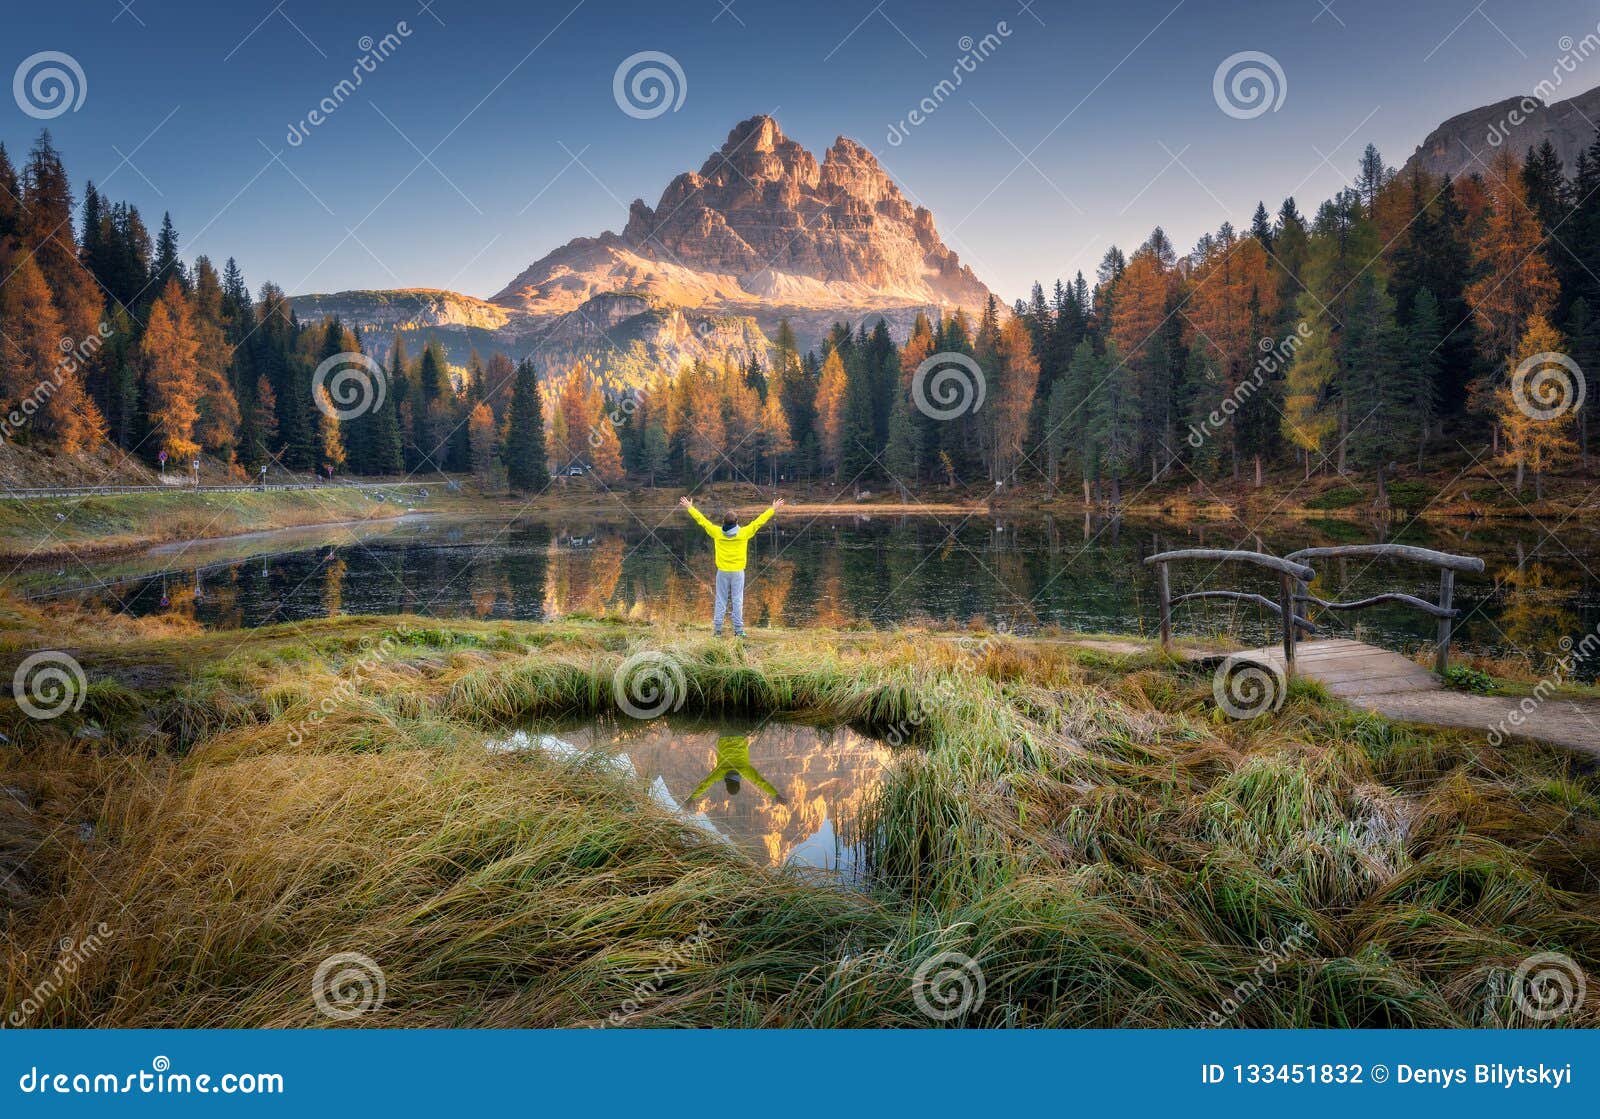 man with raised up arms on antorno lake in autumn at sunrise